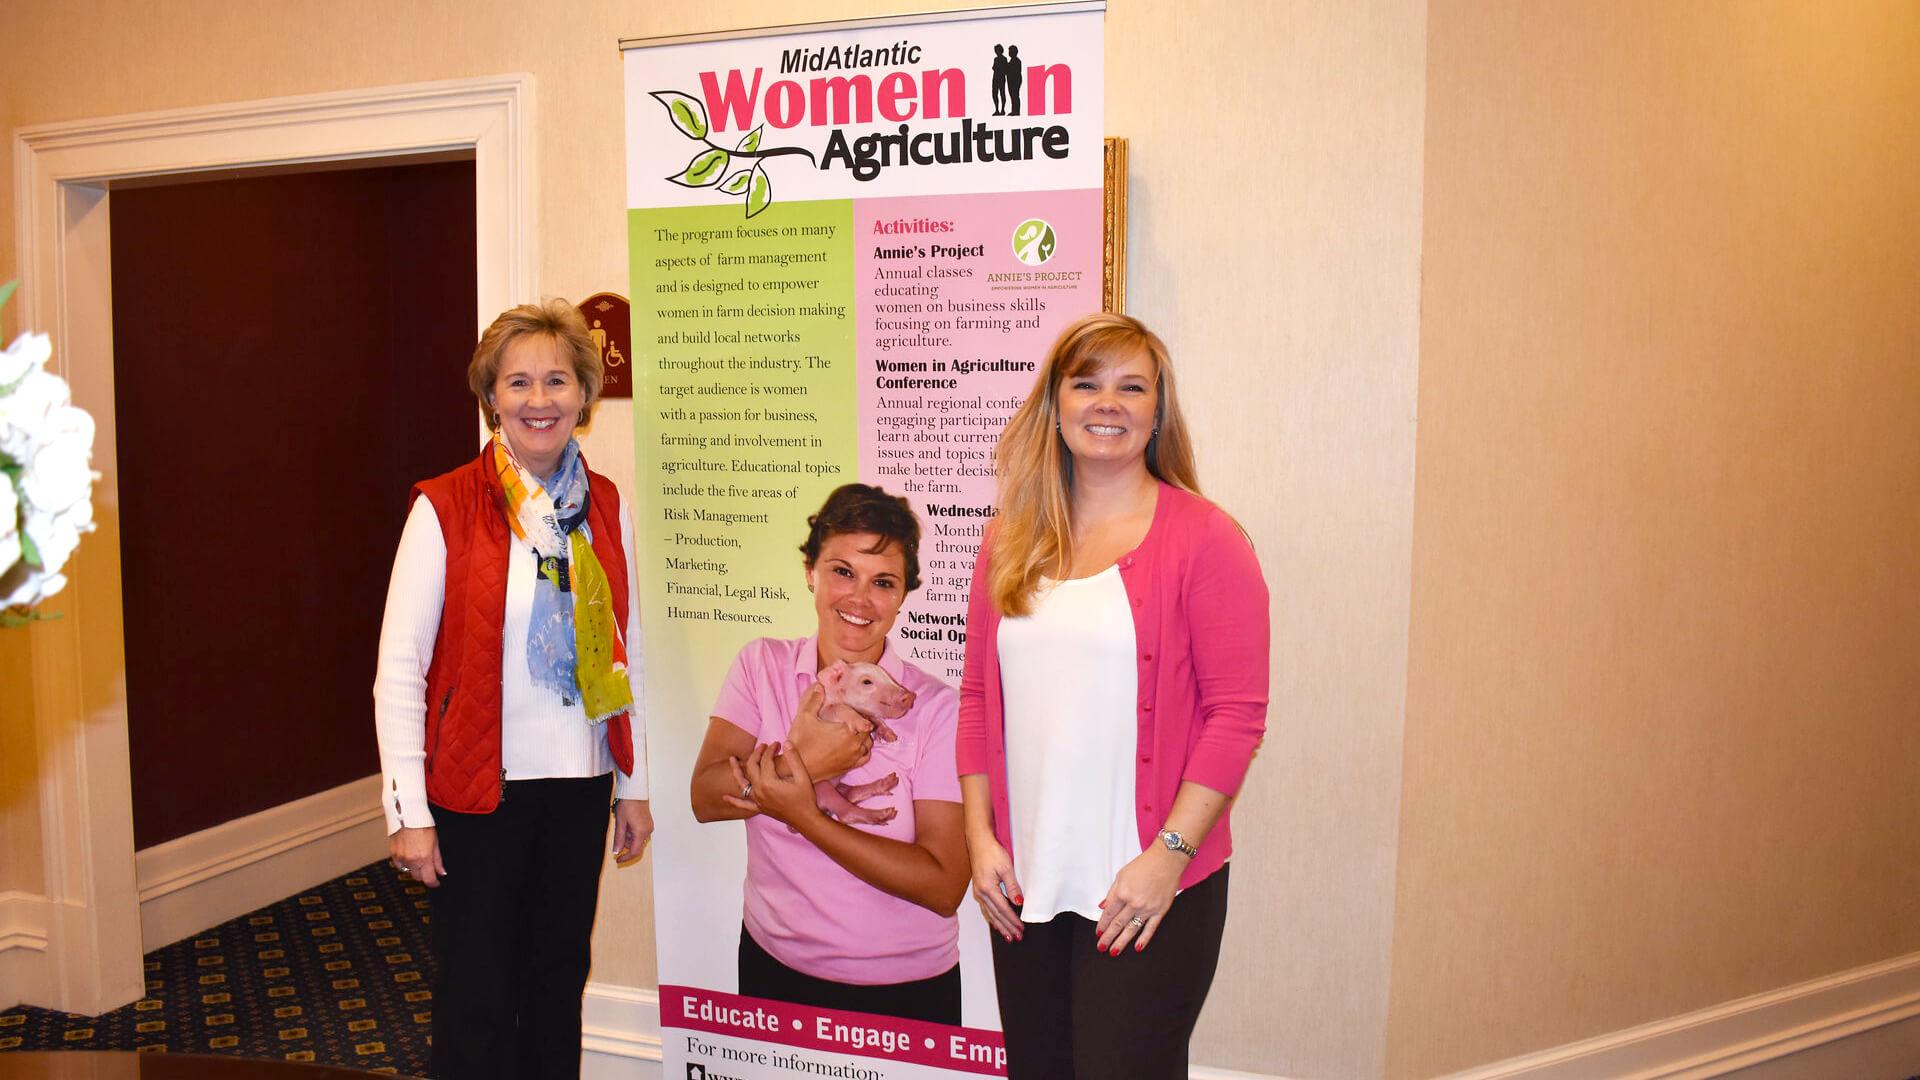 Two extension agents, Jenny Rhodes and Shannon Dill, standing in front of a Women in Agriculture sign